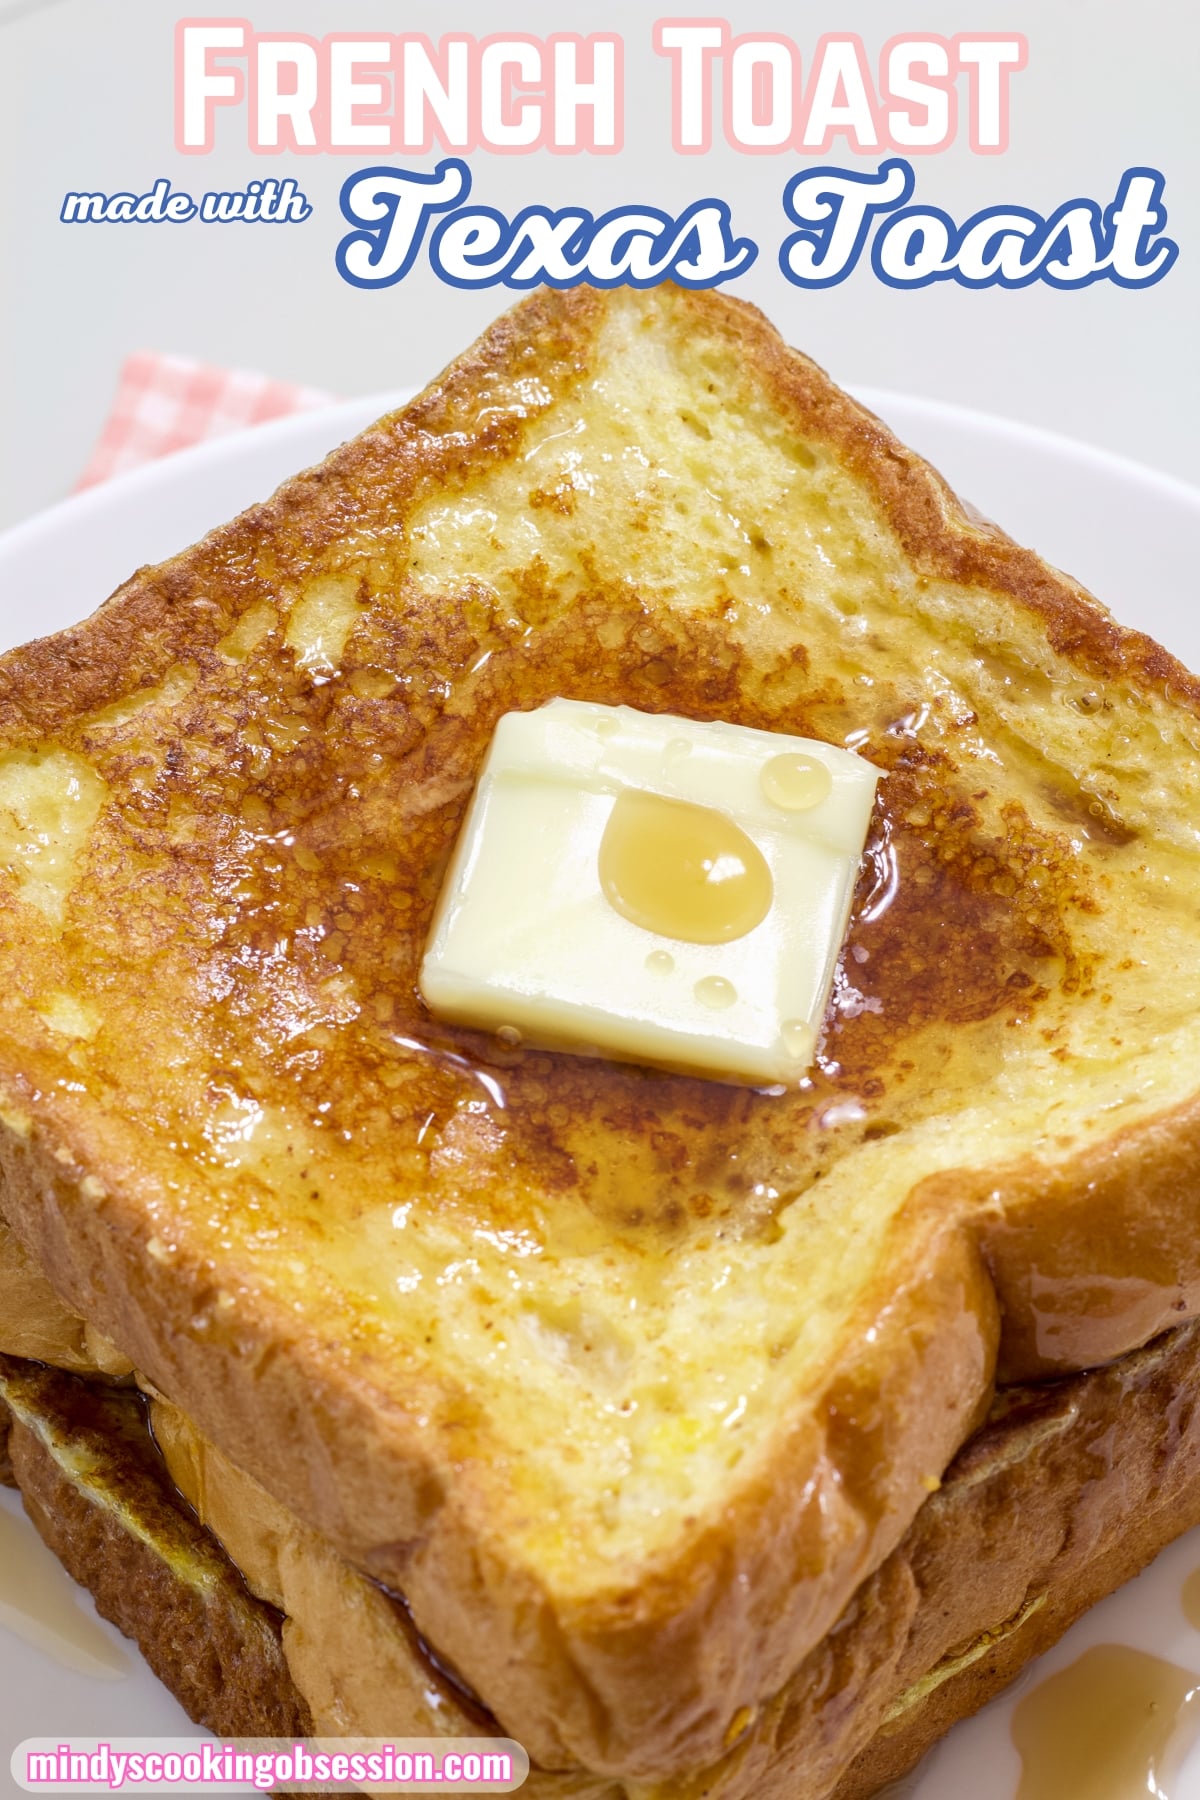 Try our easy 20-minute recipe for the best Texas French toast. Made with basic ingredients like Texas toast, eggs, milk, and vanilla. via @mindyscookingobsession